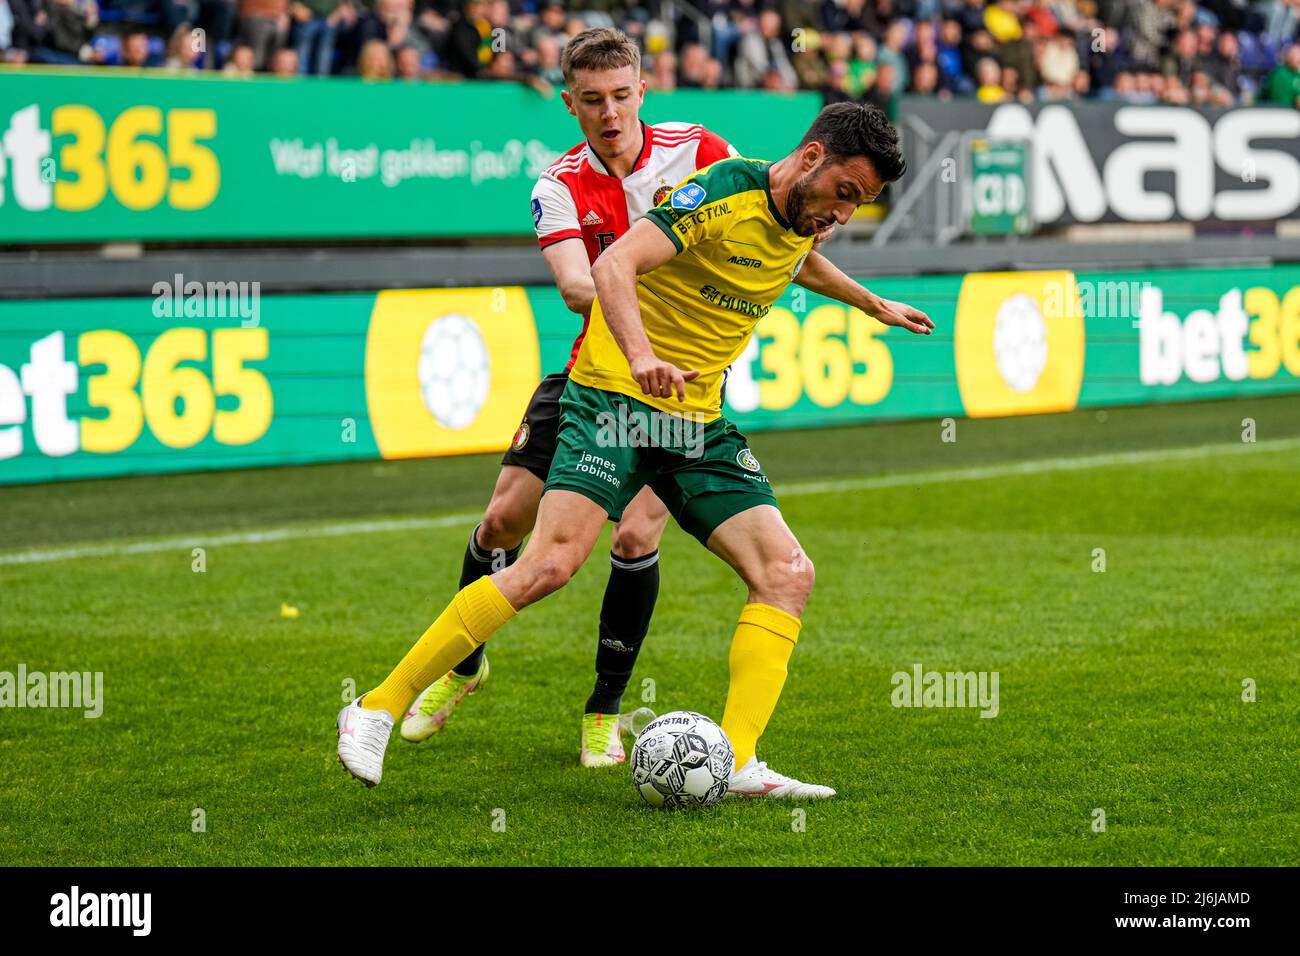 Sittard - Patrik Walemark of Feyenoord, Andreas Samaris of Fortuna Sittard during the match between Fortuna Sittard v Feyenoord at Fortuna Sittard Stadion on 1 May 2022 in Sittard, Netherlands. (Box to Box Pictures/Yannick Verhoeven) Stock Photo